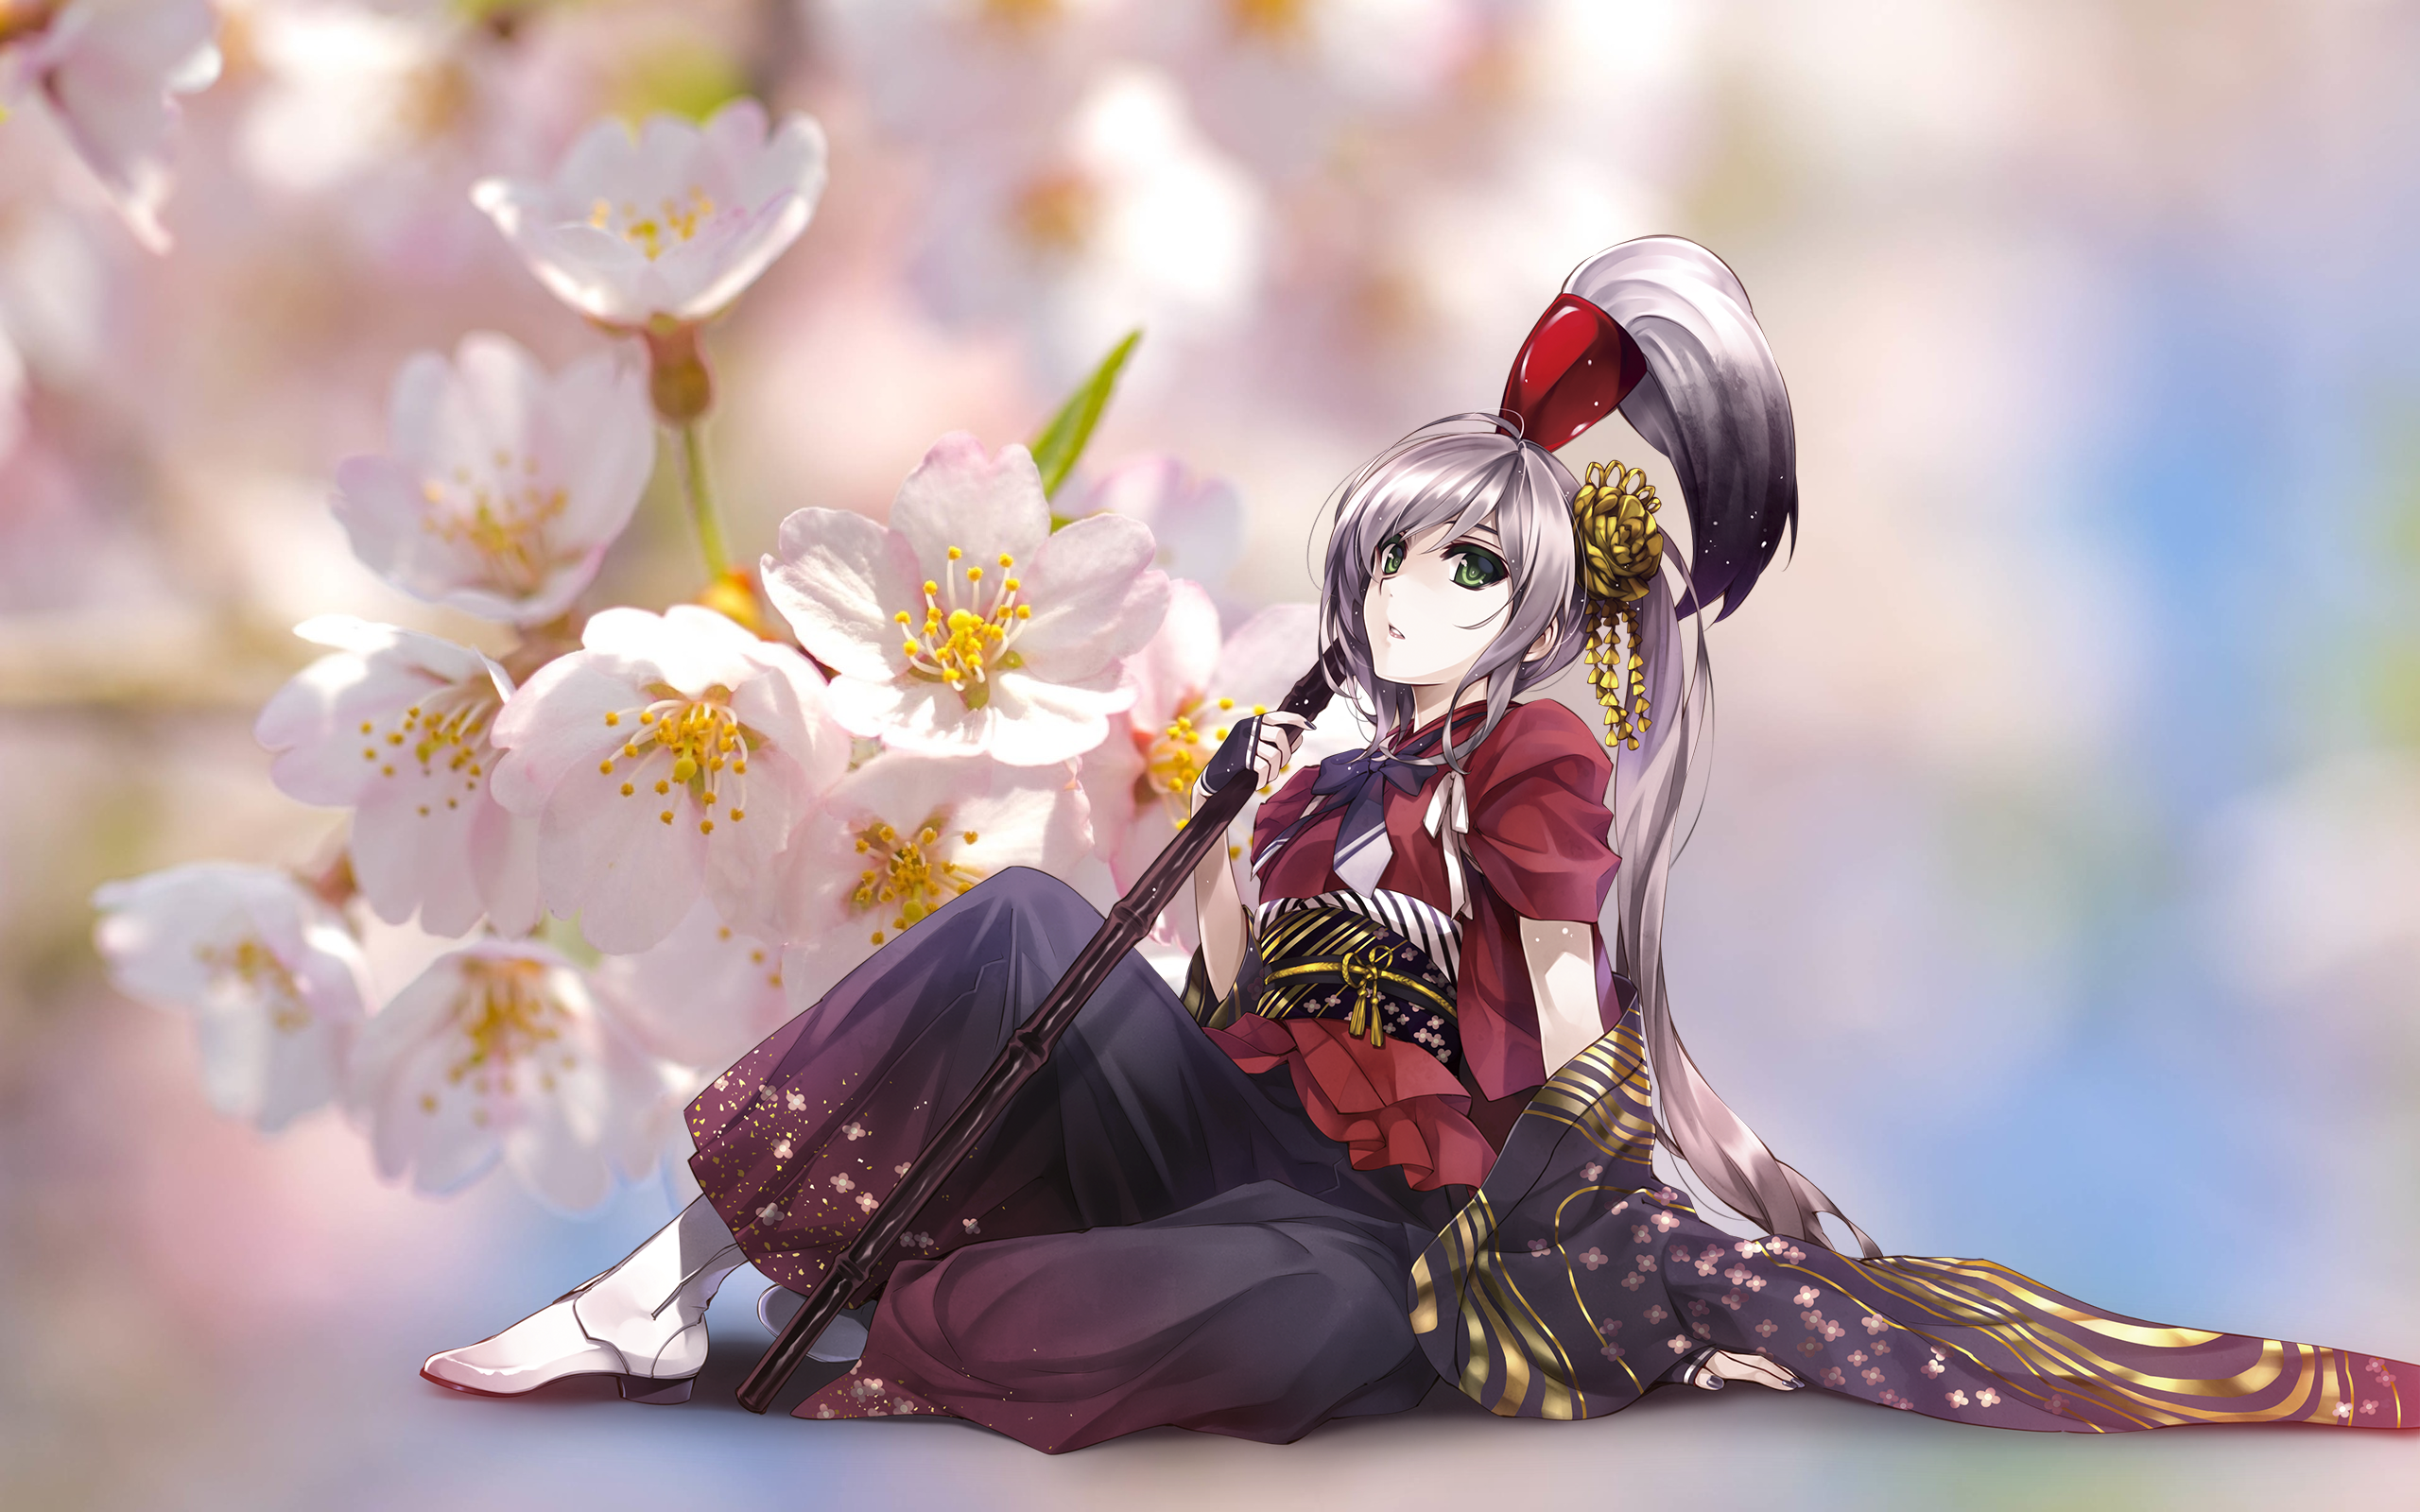 cherry blossom wallpapers